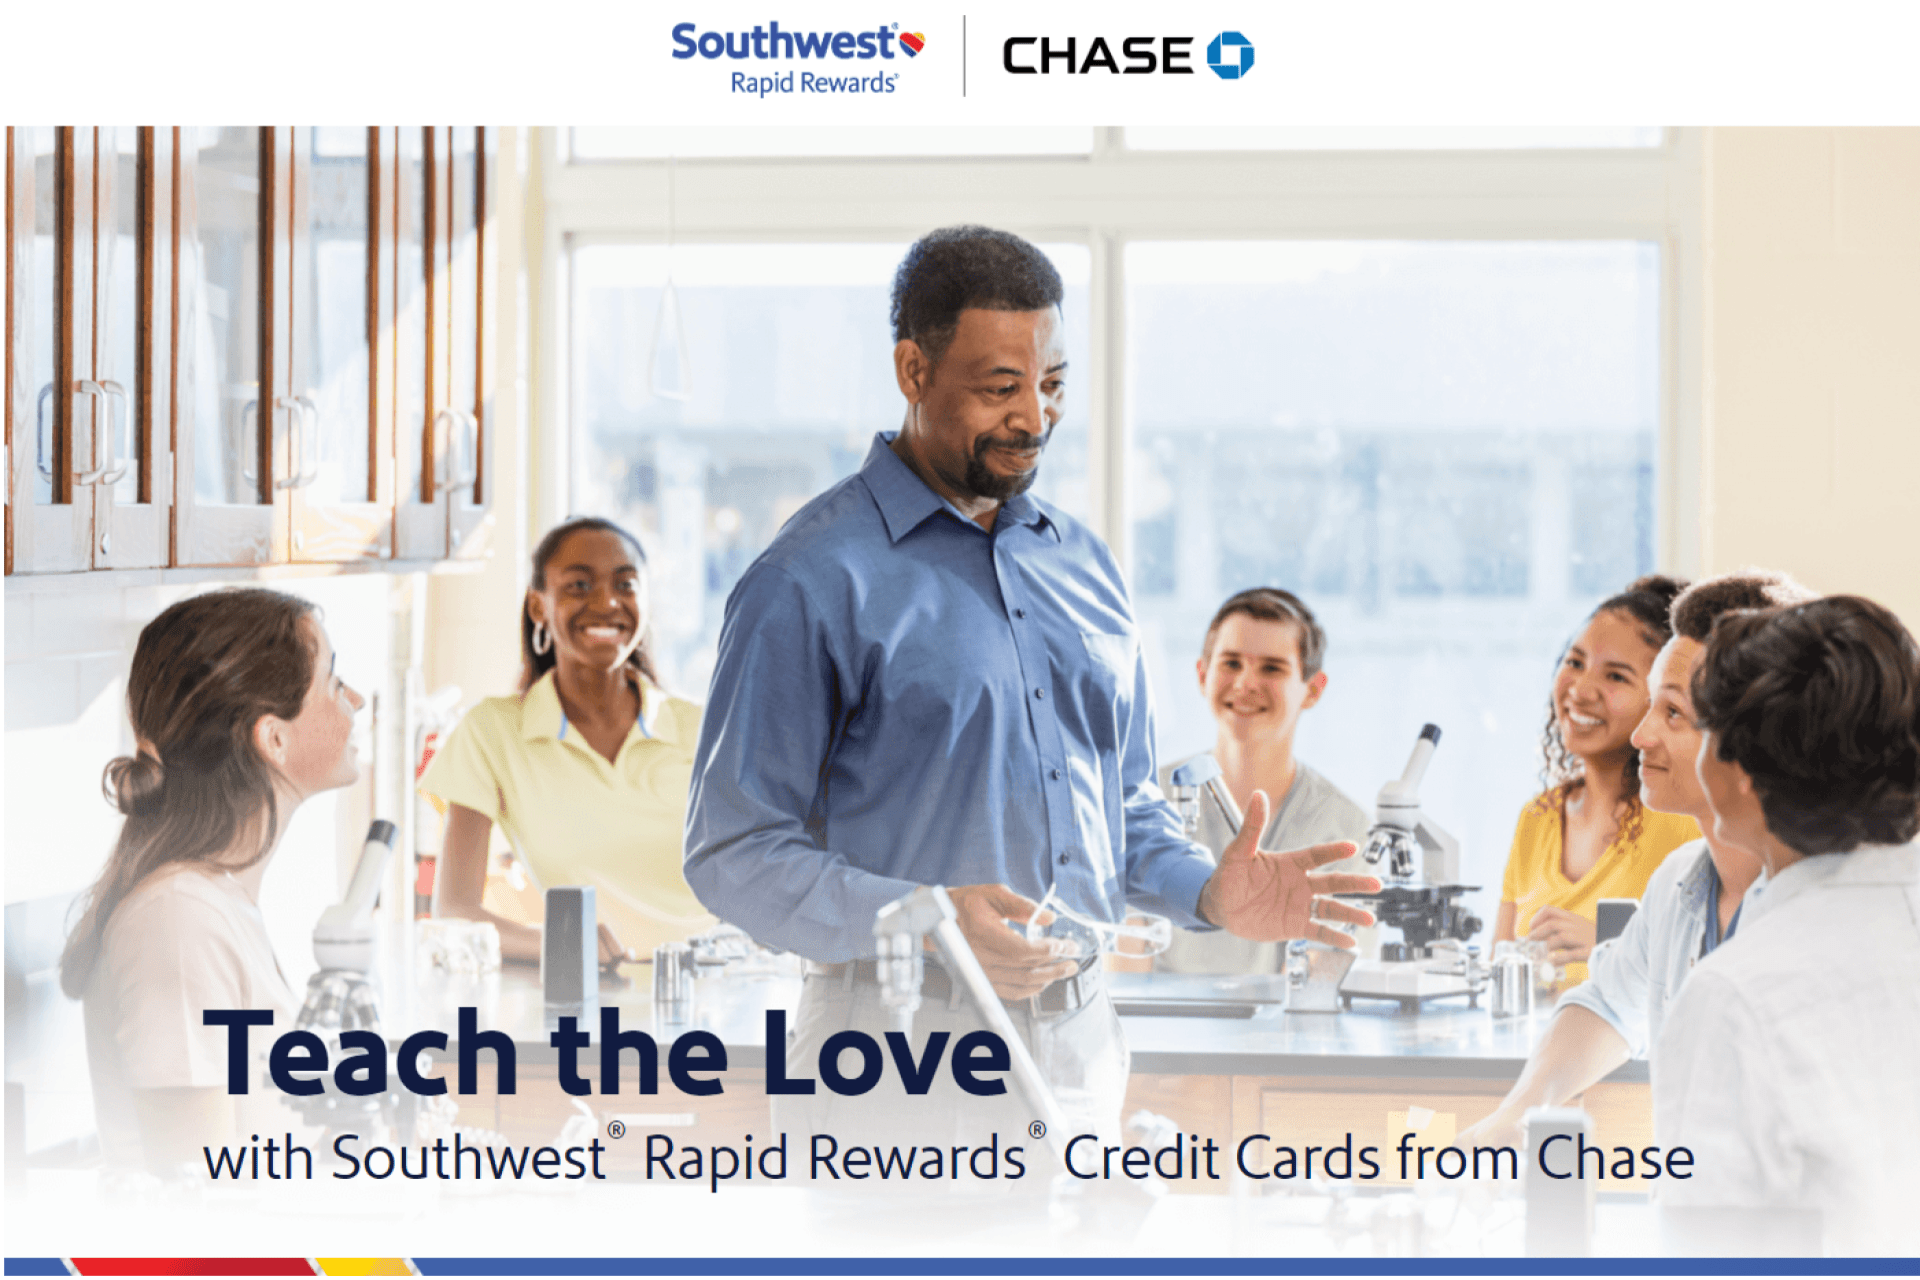 chase southwest teach the love event